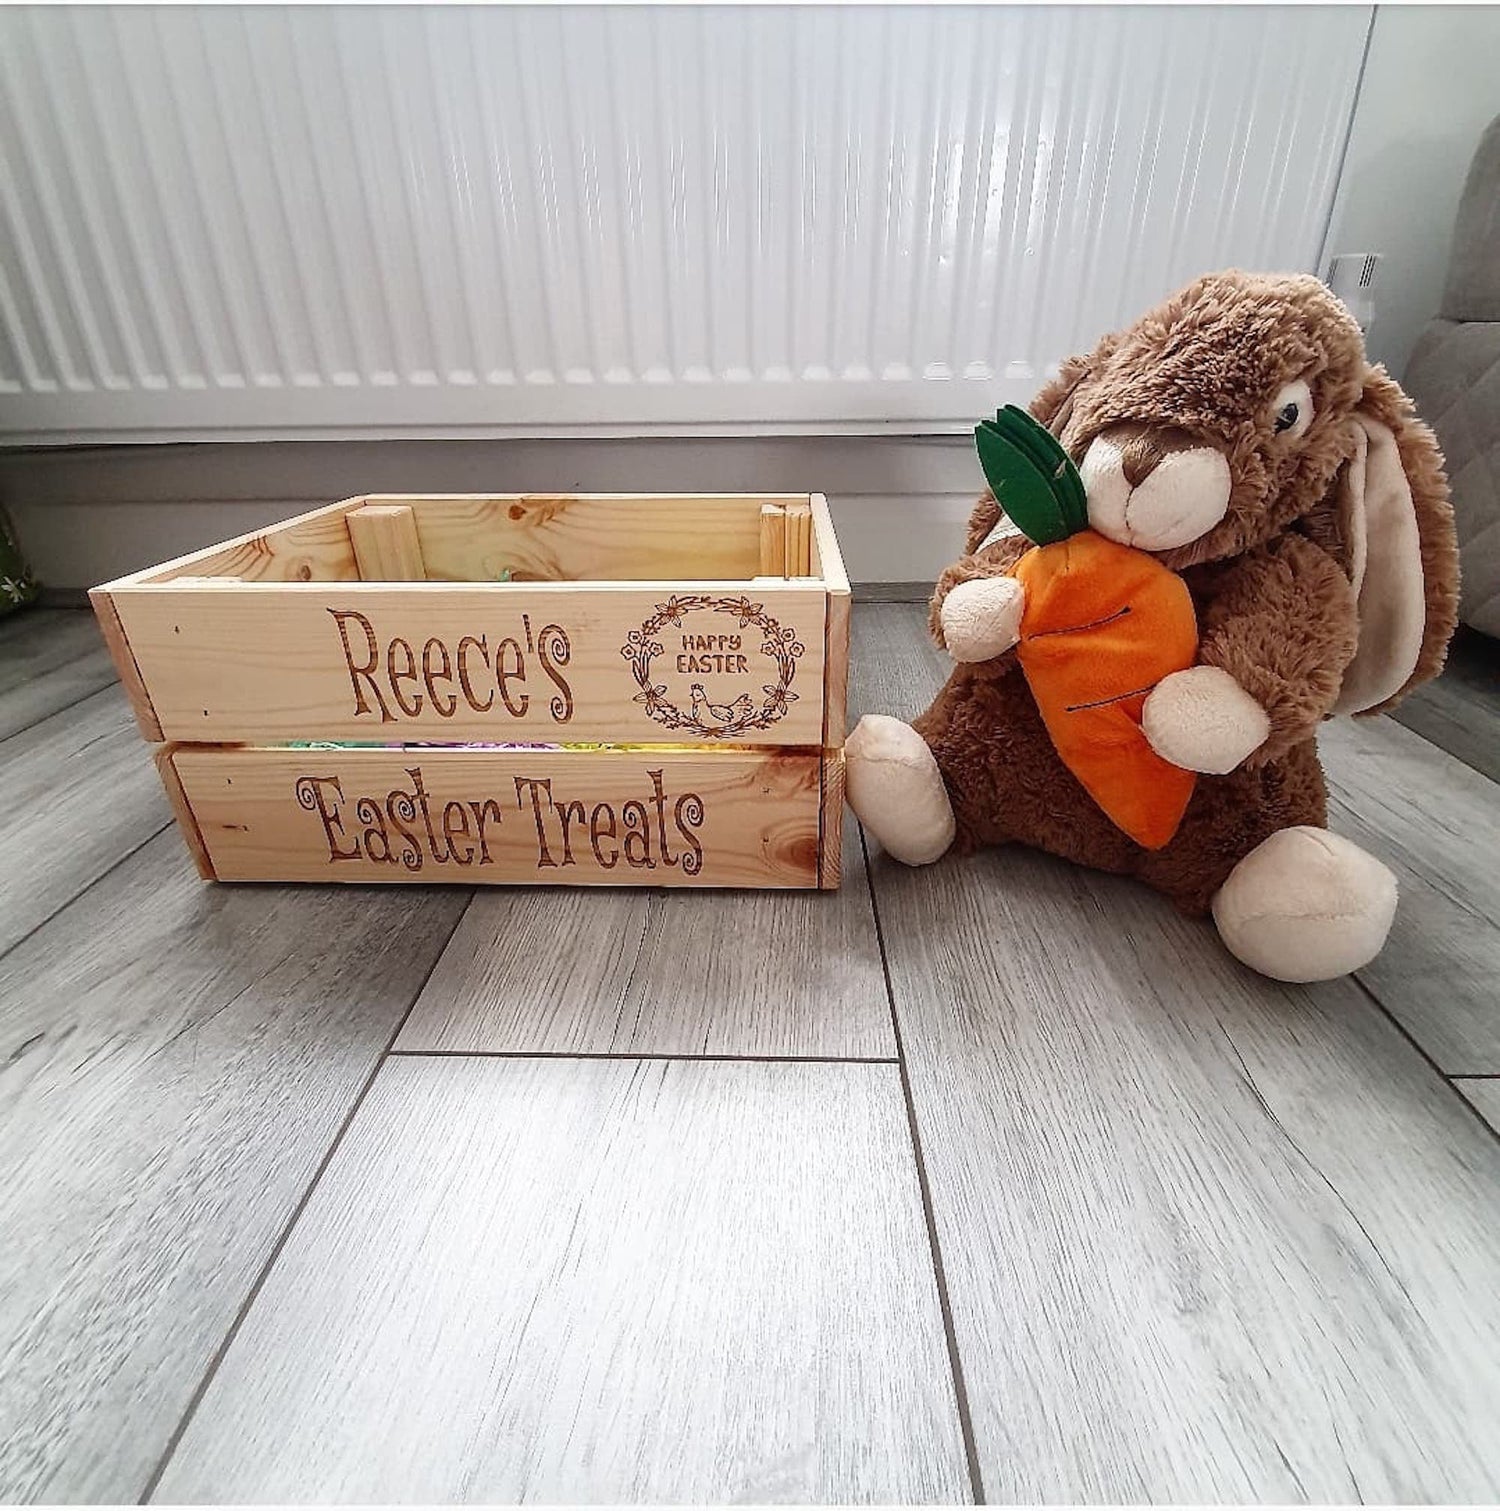 Personalised wooden Easter crate. - LaserGiftsuk